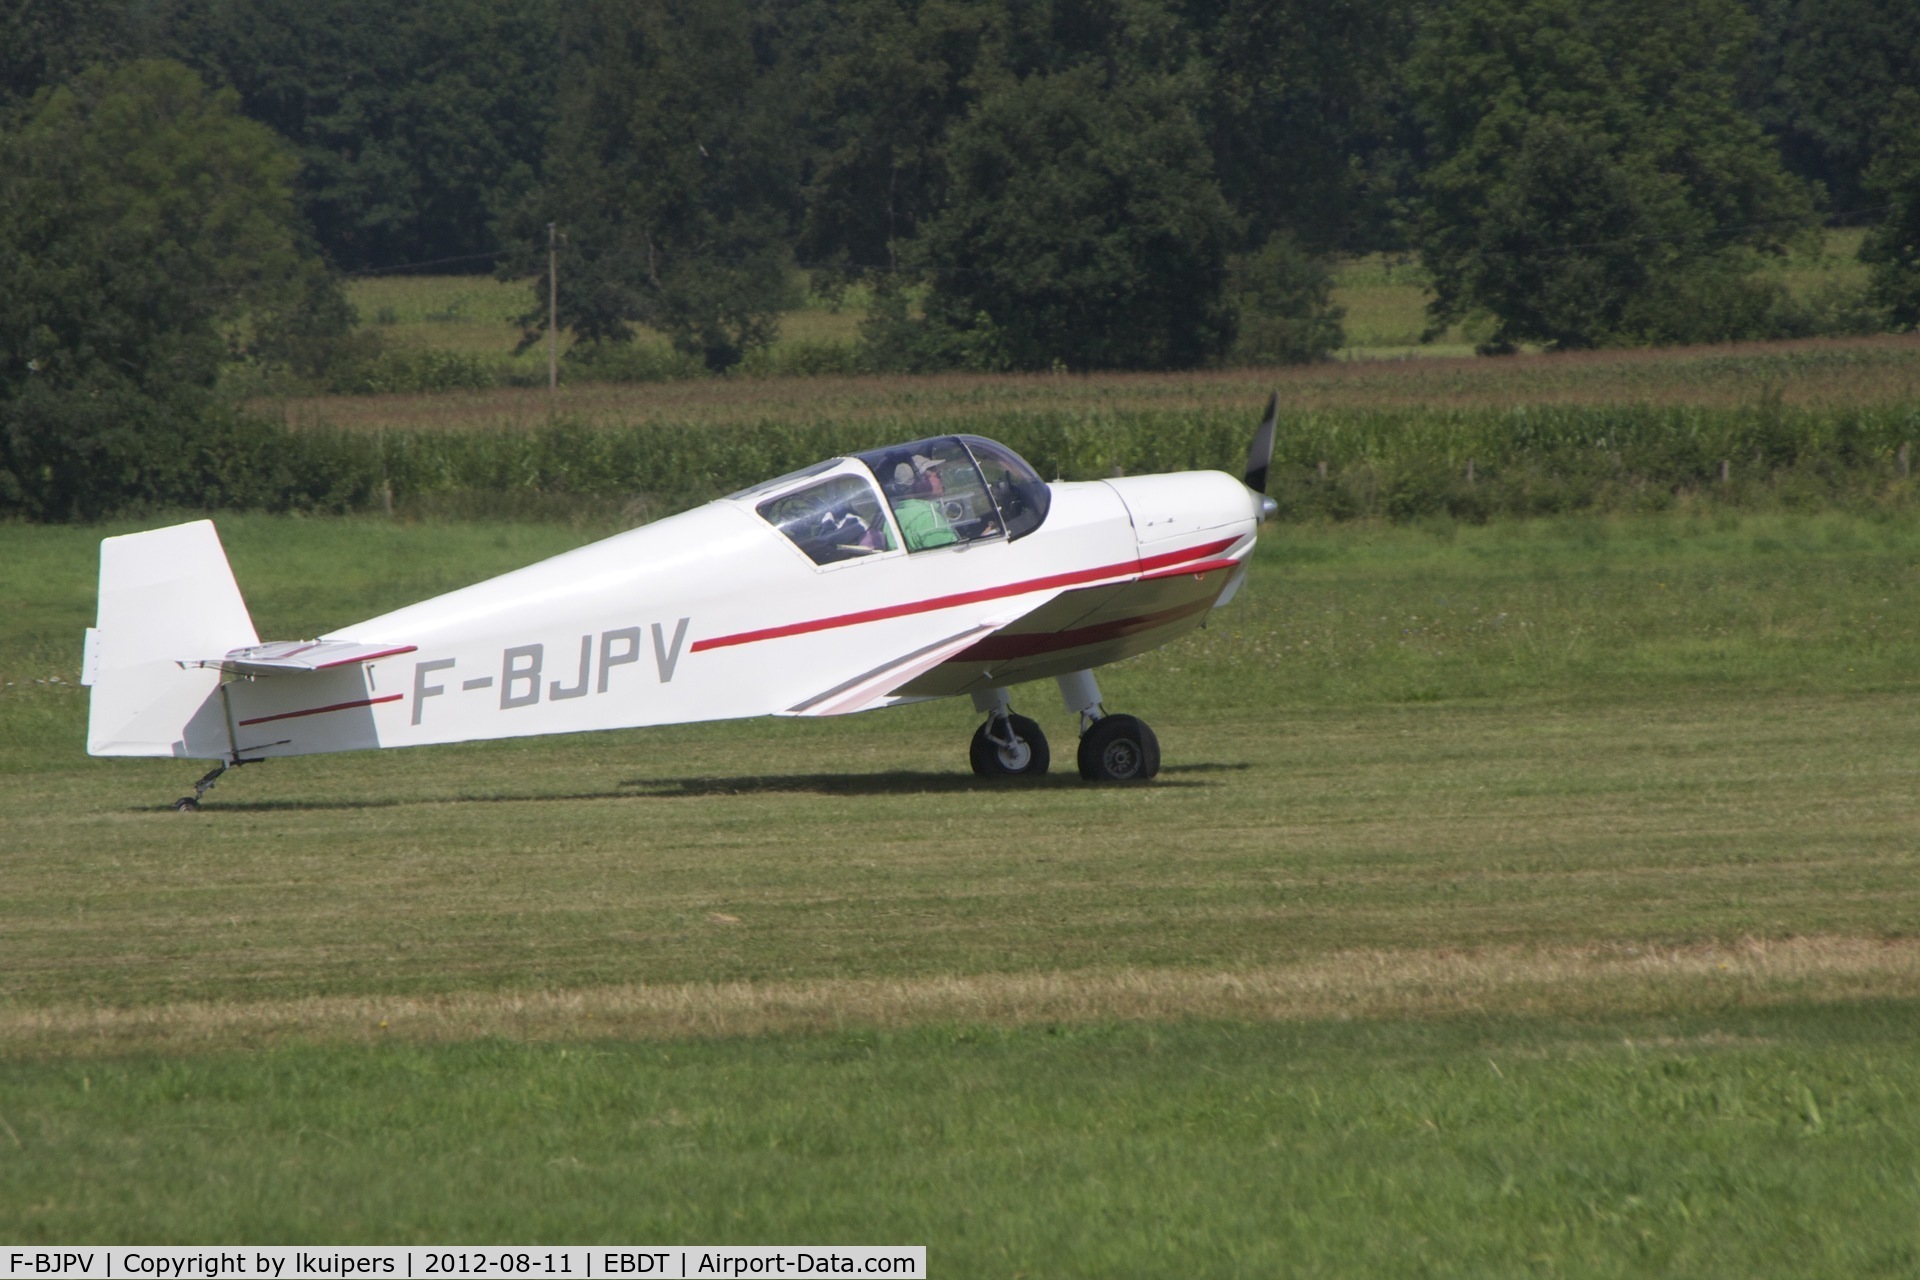 F-BJPV, 1961 Wassmer (Jodel) D-112 Club C/N 1065, Arriving at the 2012 Old timer Fly-in at Schaffen Diest in Belgium